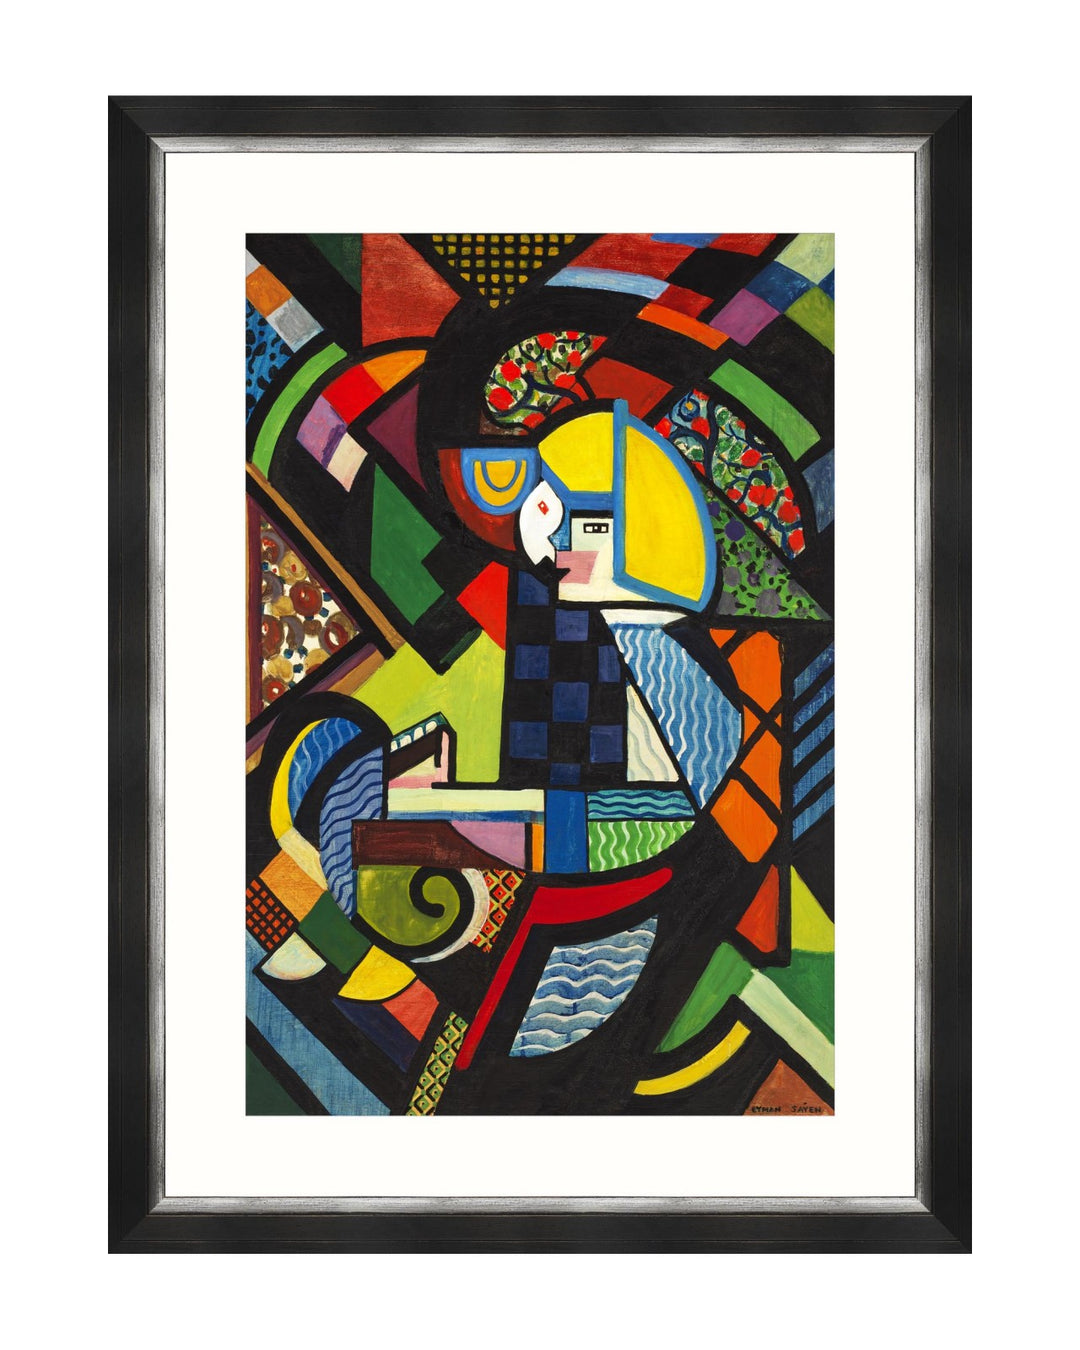 mind-the-gap-woodstock-collection-fine-art-framed-art-daughter-in-a-rocking-chair-henry-sayen-art-print-framed-cubist-style-